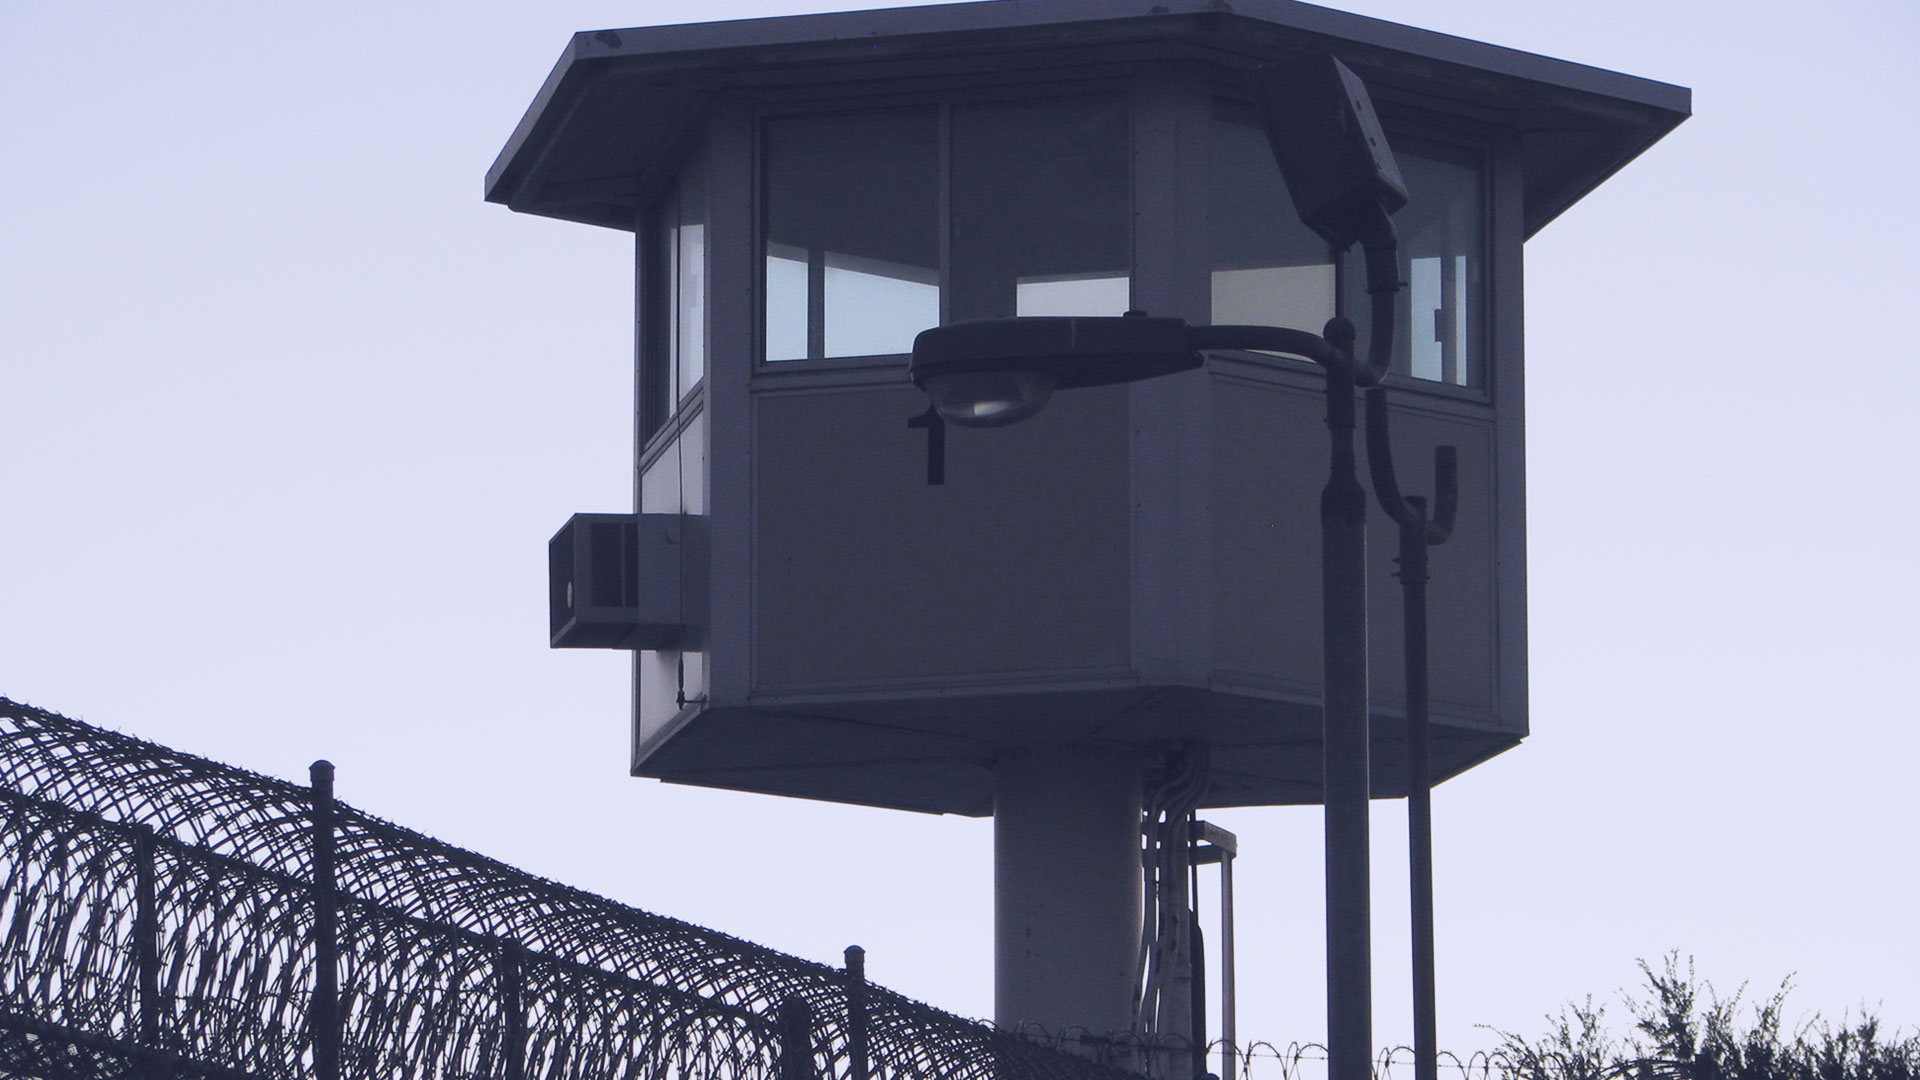 Guard tower at an American prison